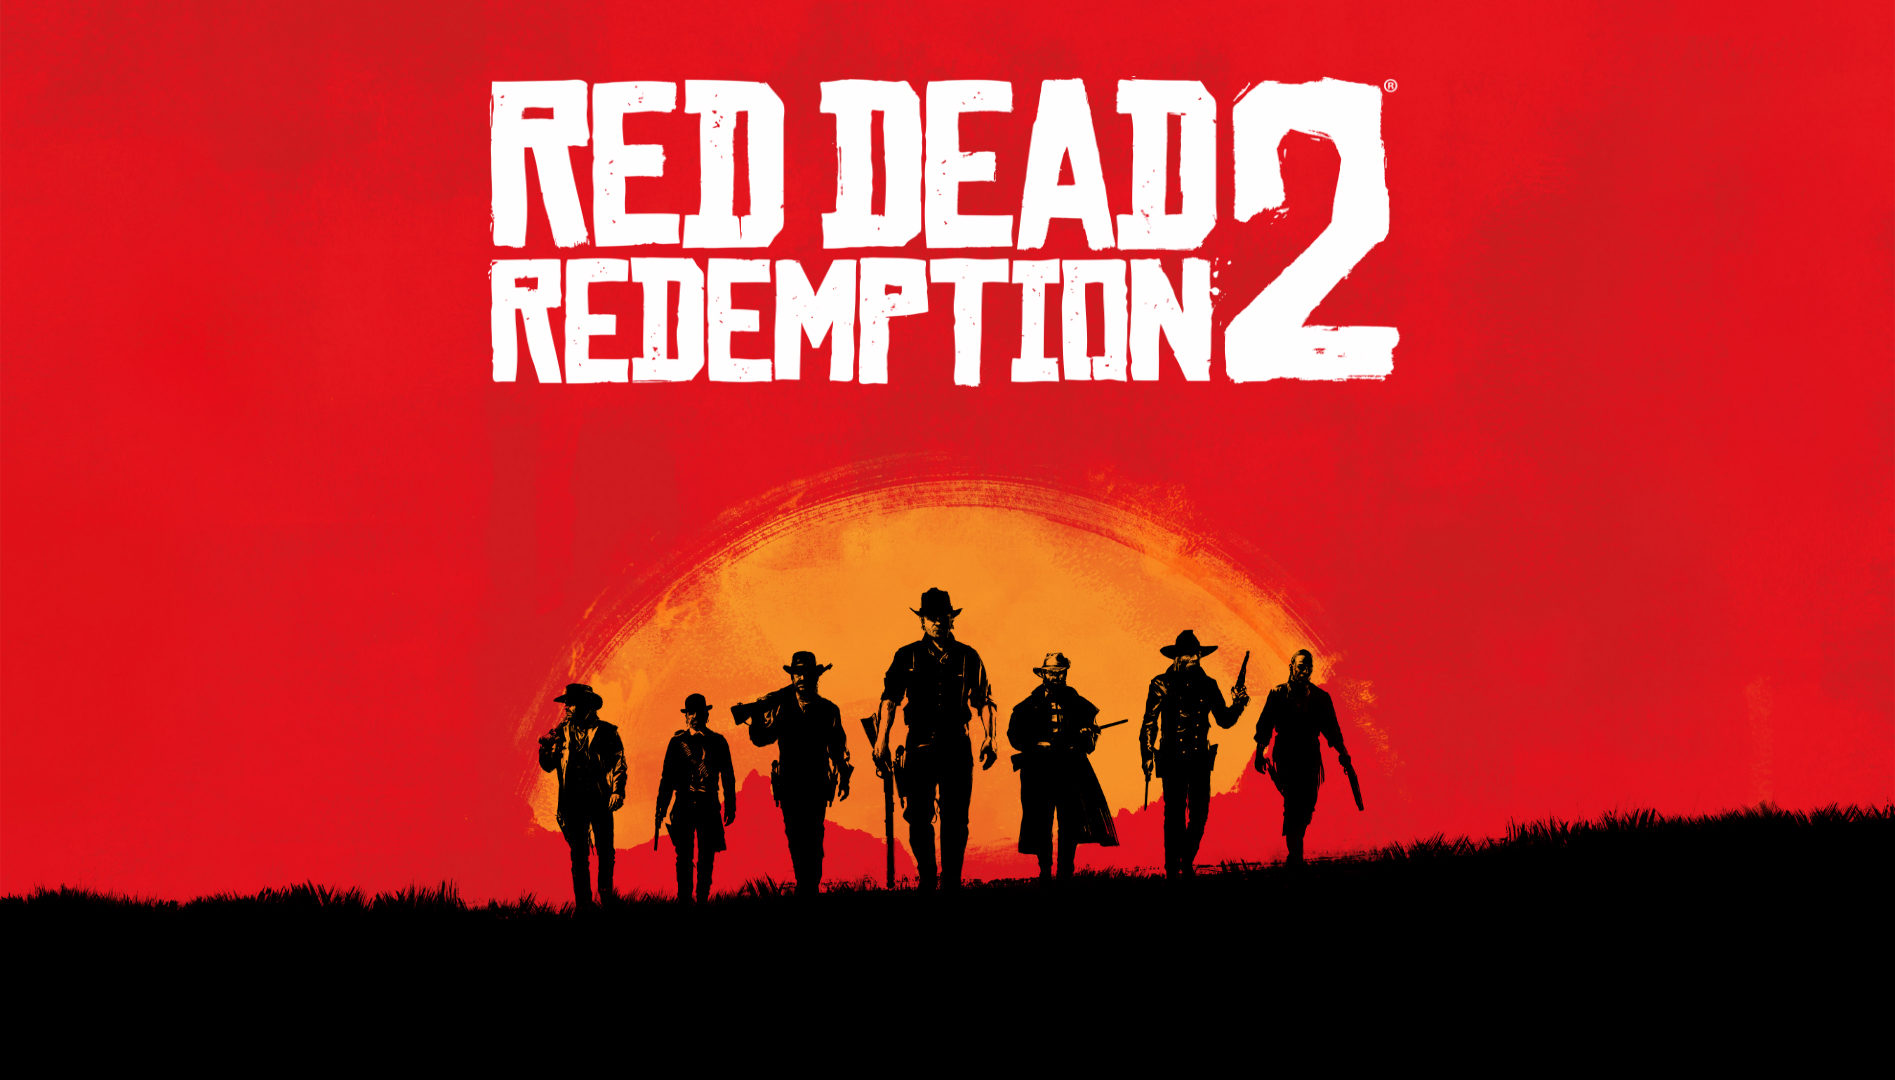 Red Dead Redemption 2 — Announced